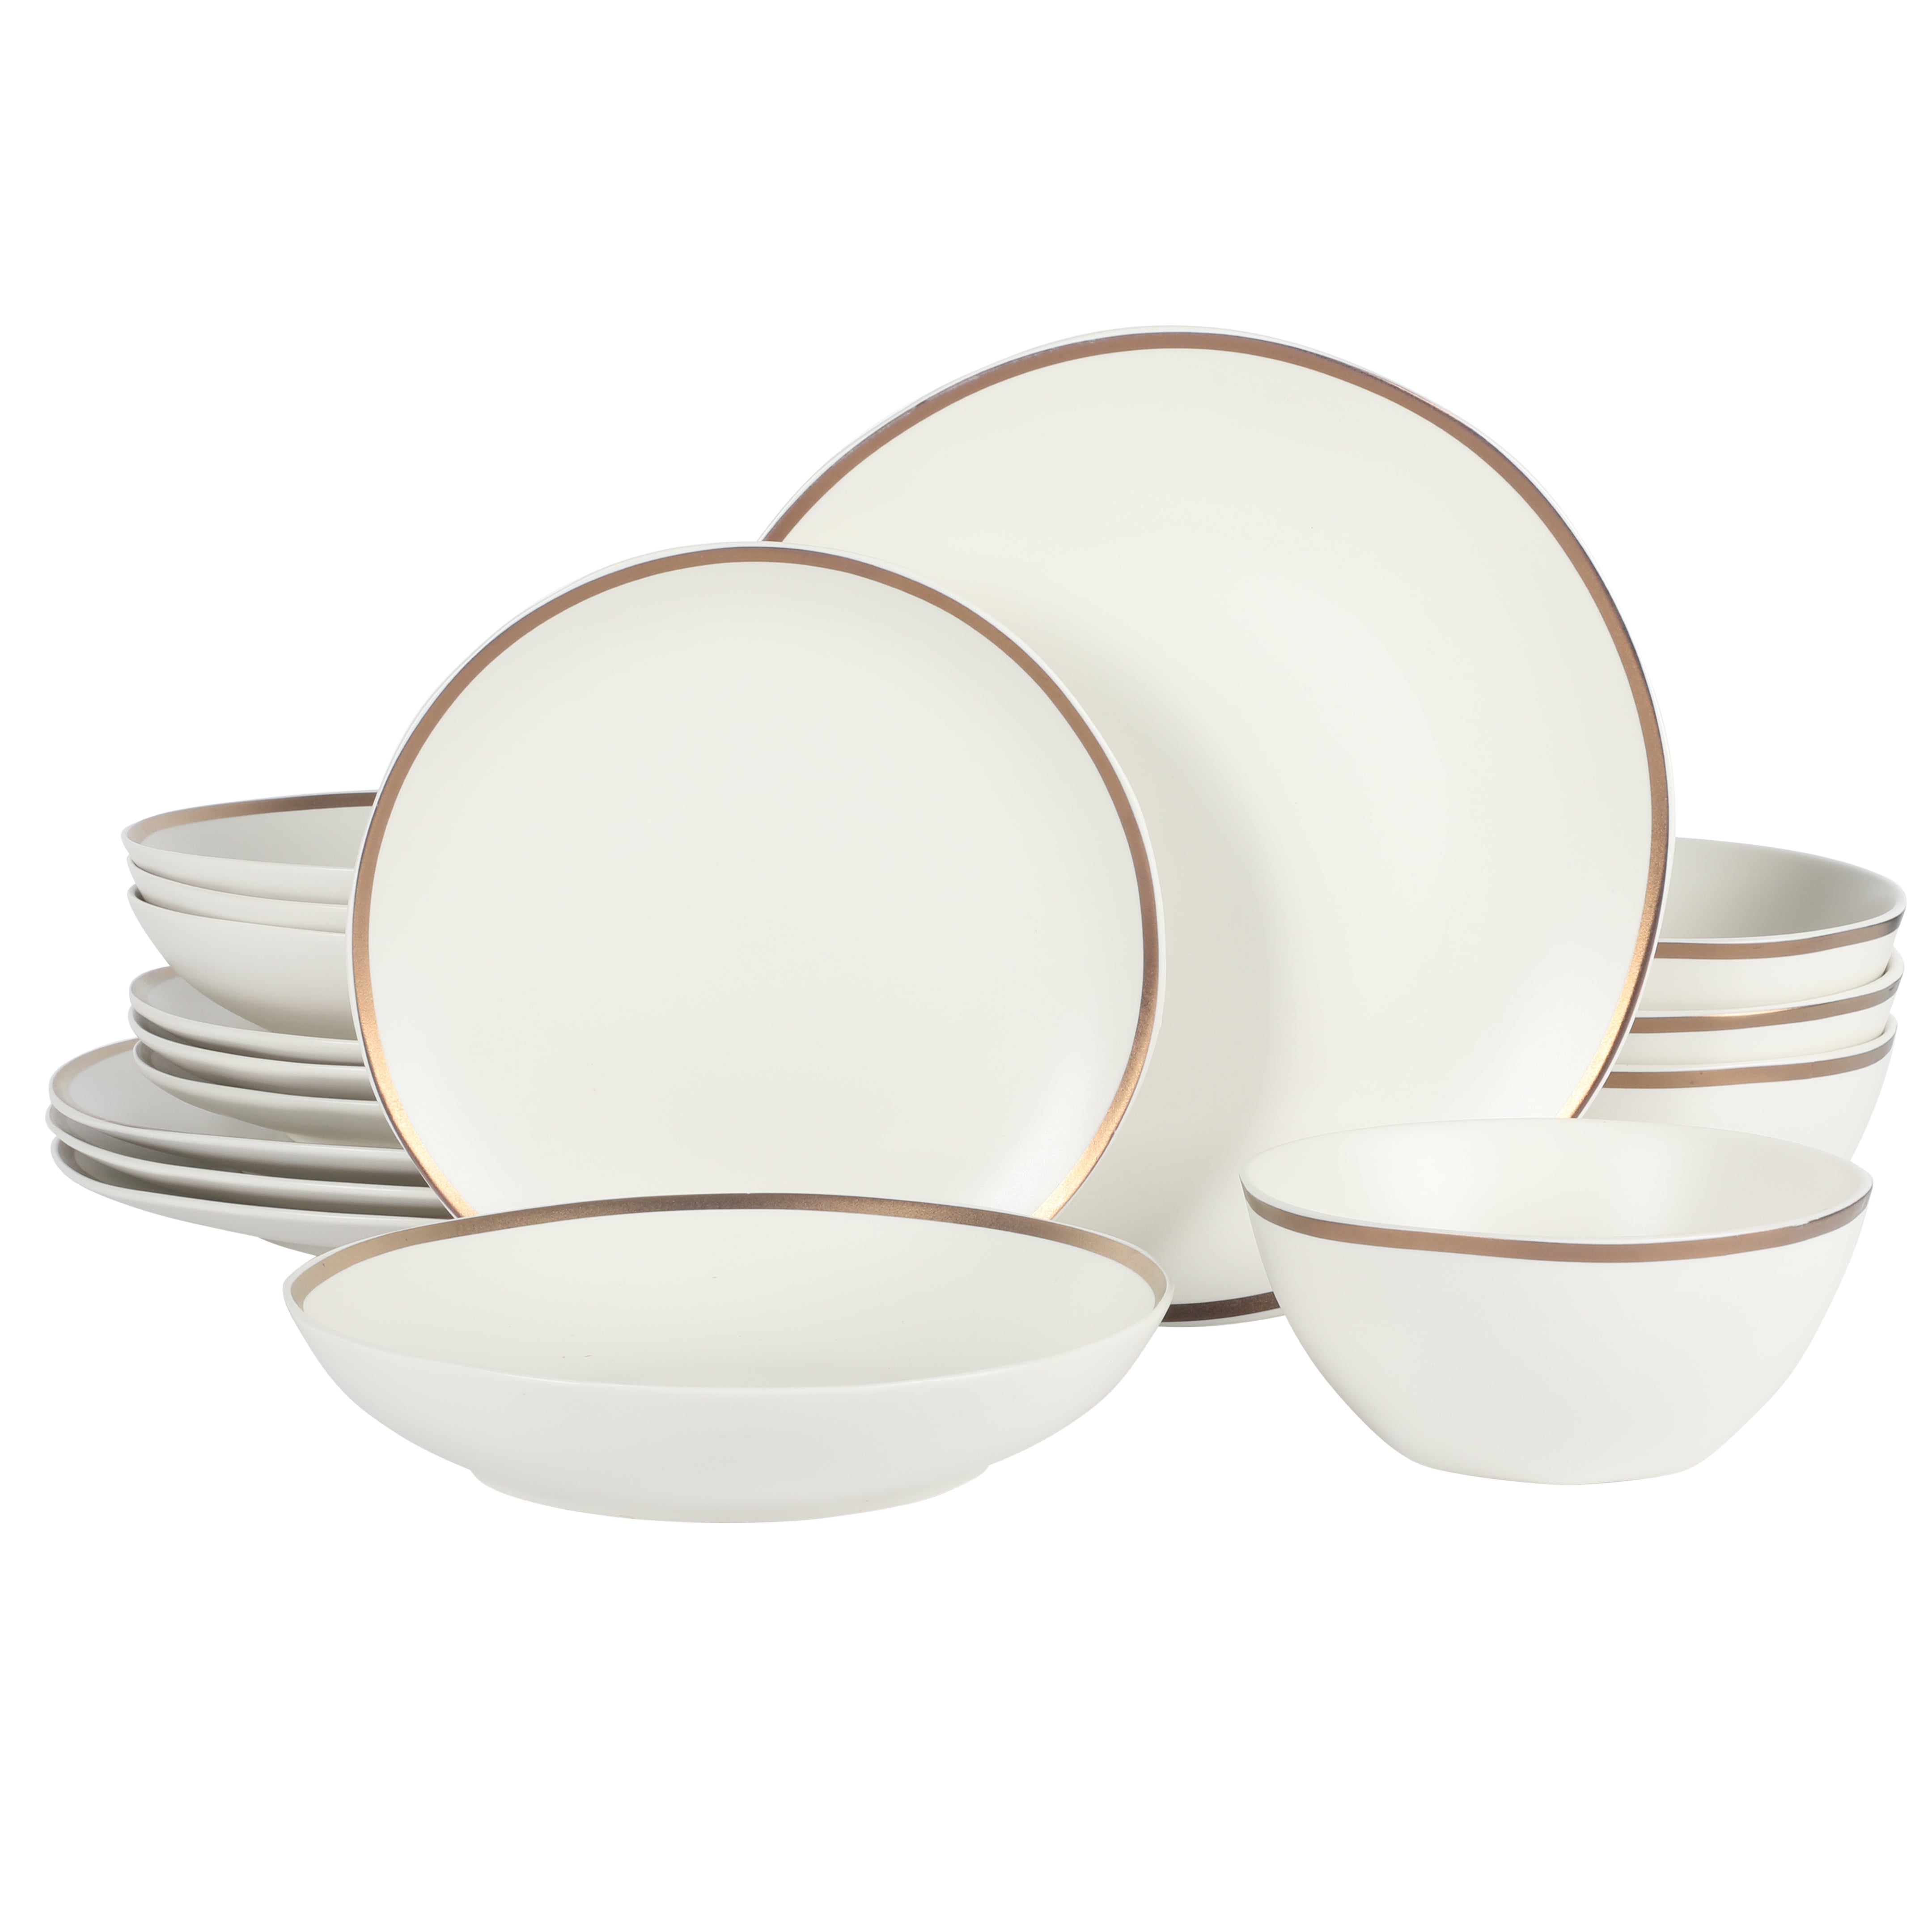 Gibson Elite Kings Road Double Plates and Bowl Organic Round Porcelain Dinnerware Set